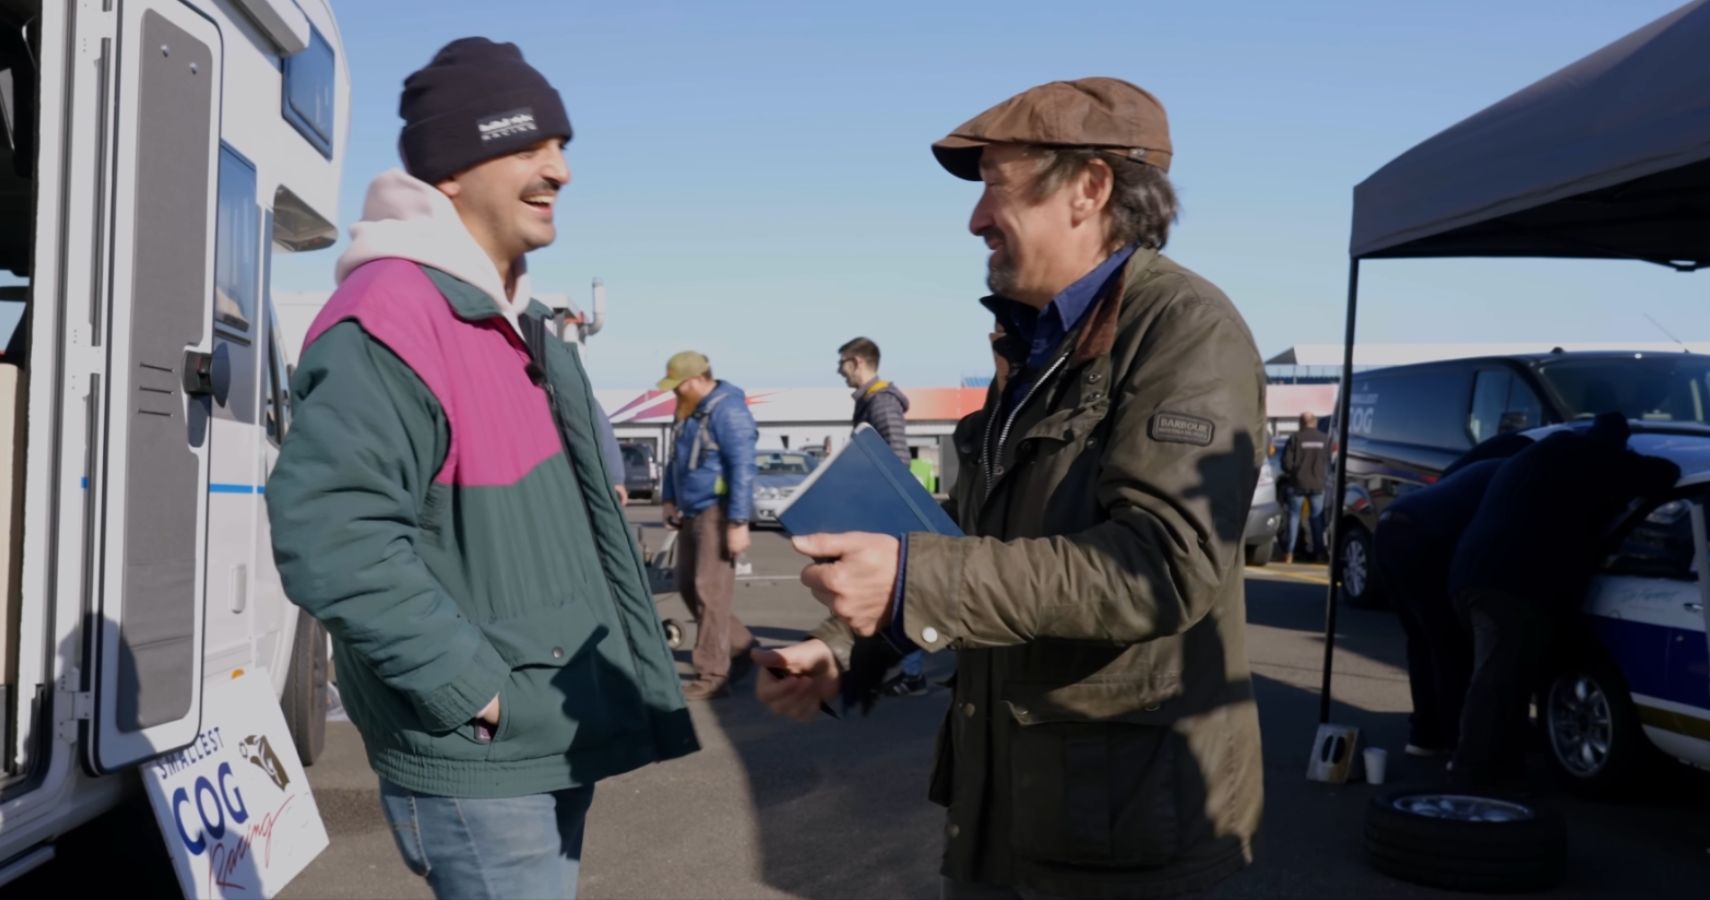 Richard Hammond And Mike Fernie At The Smallest Cog's Debut Race